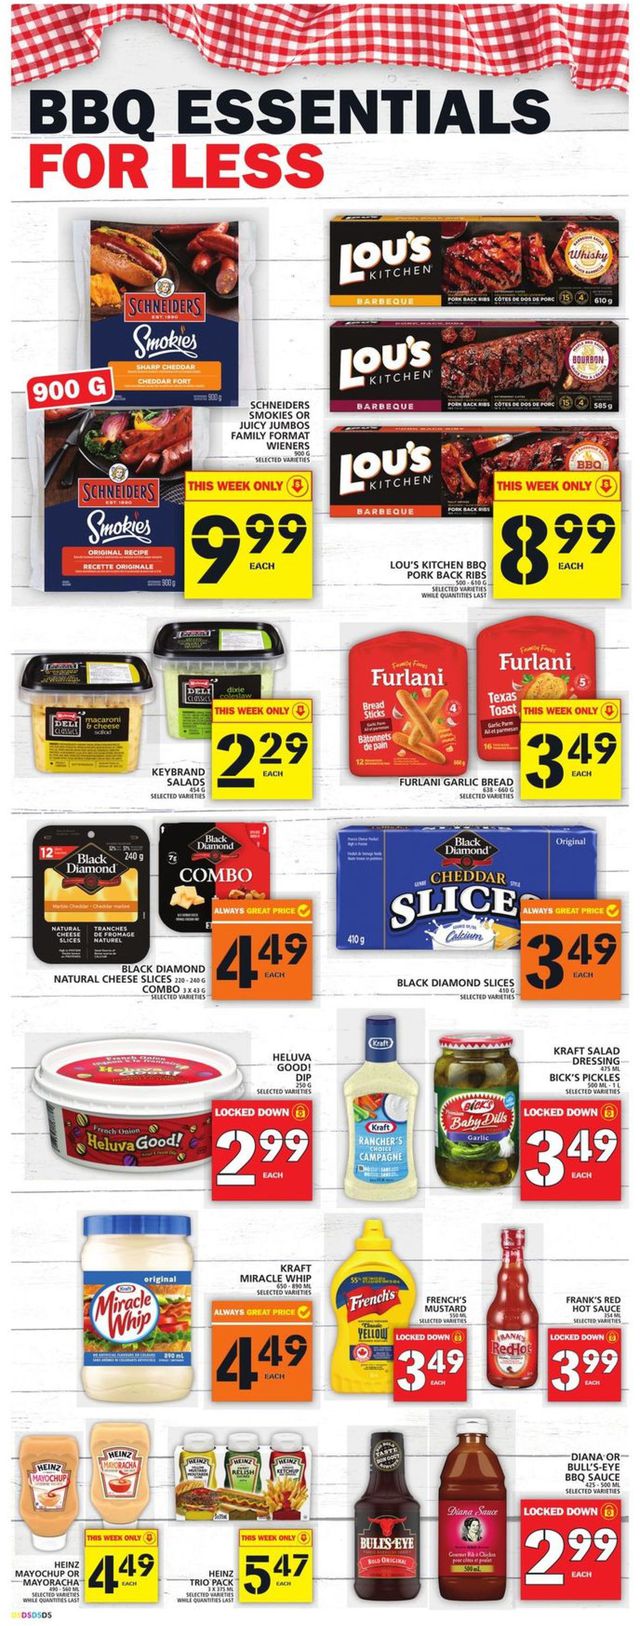 Food Basics Flyer from 06/16/2022